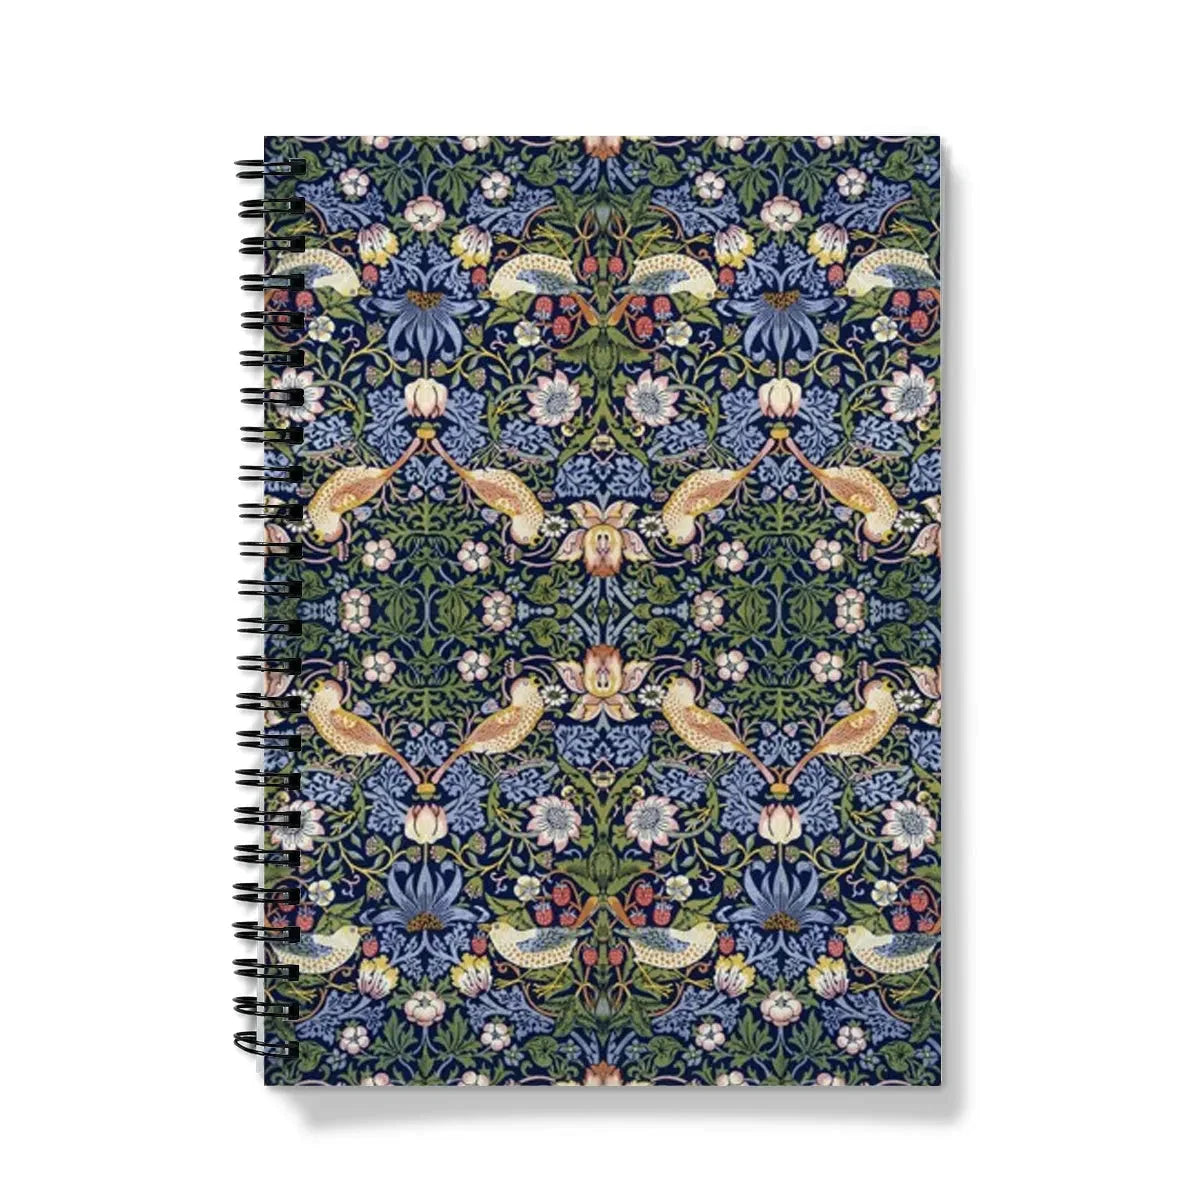 Strawberry Thief By William Morris Notebook - A5 - Graph Paper - Notebooks & Notepads - Aesthetic Art